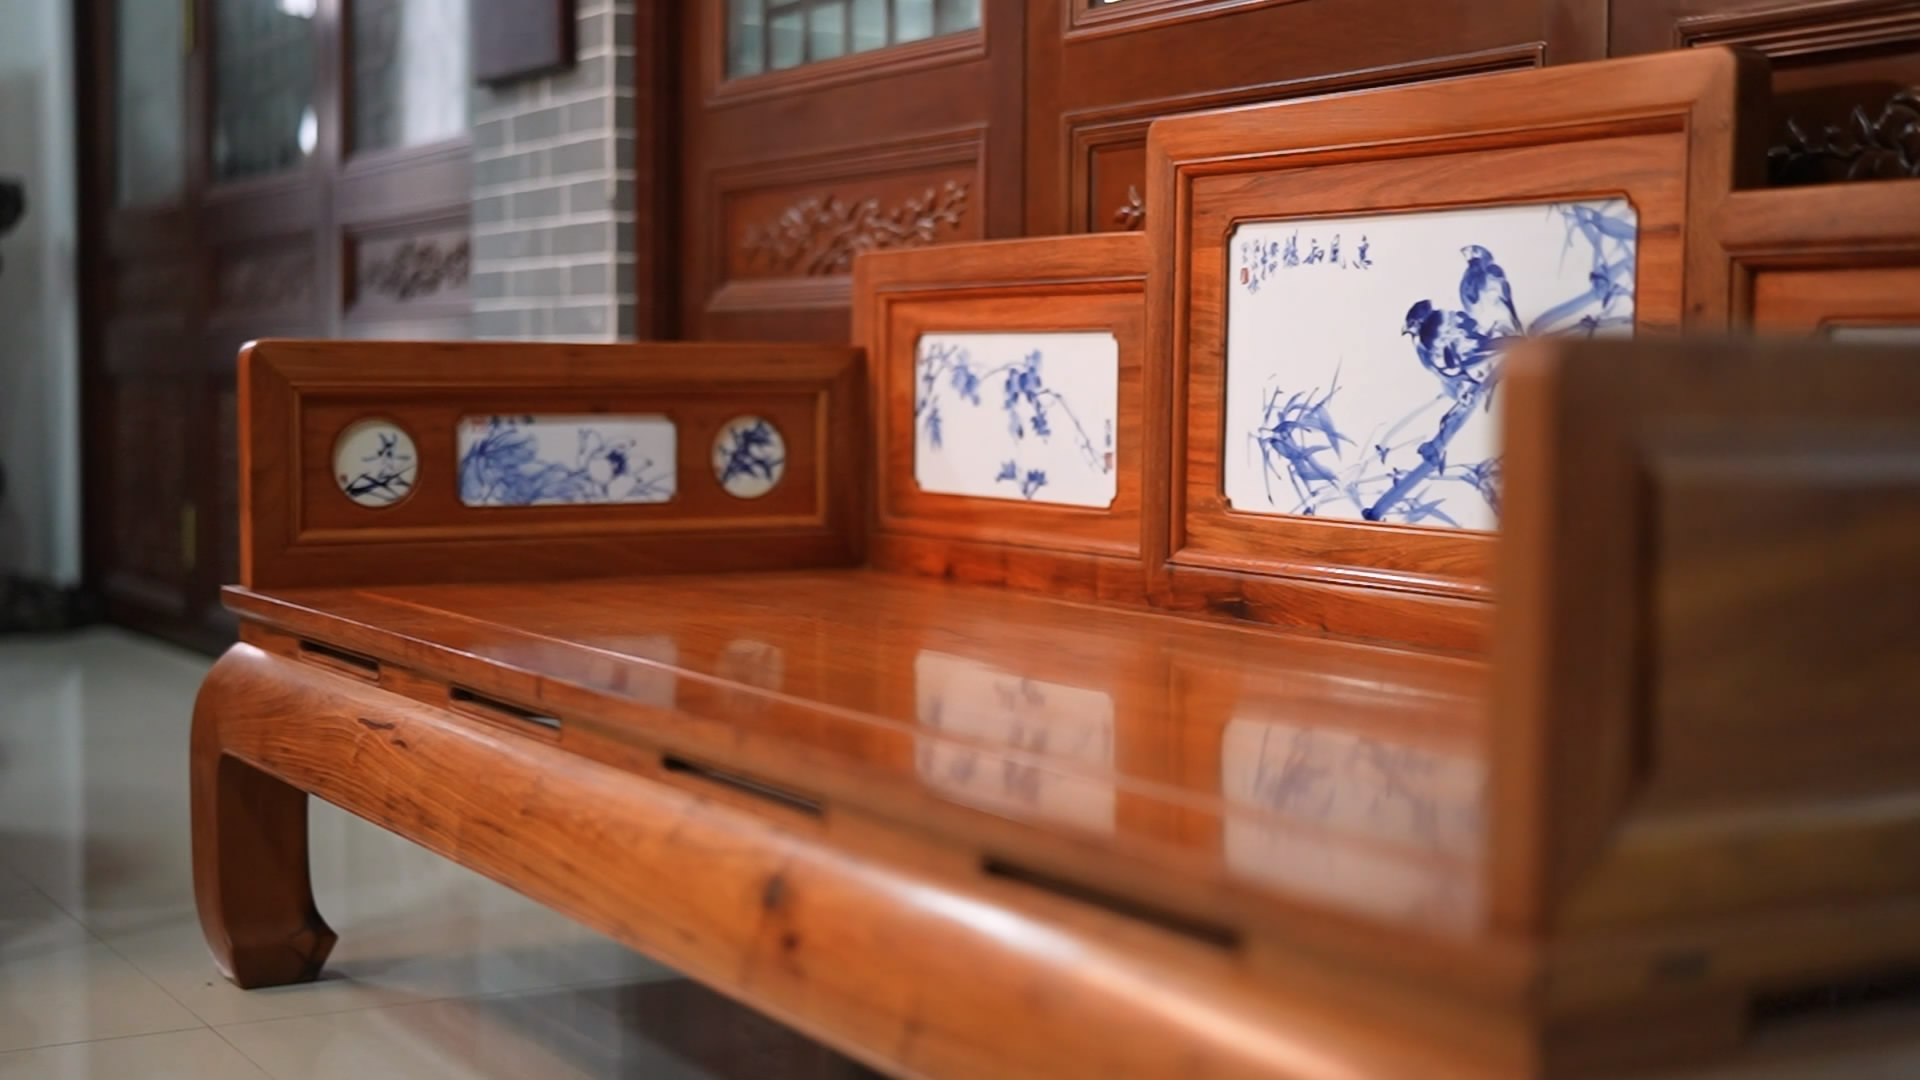 A custom-made Arhat bed with inlaid ceramic tiles painted by renowned artist Chen Yongkang. /CGTN